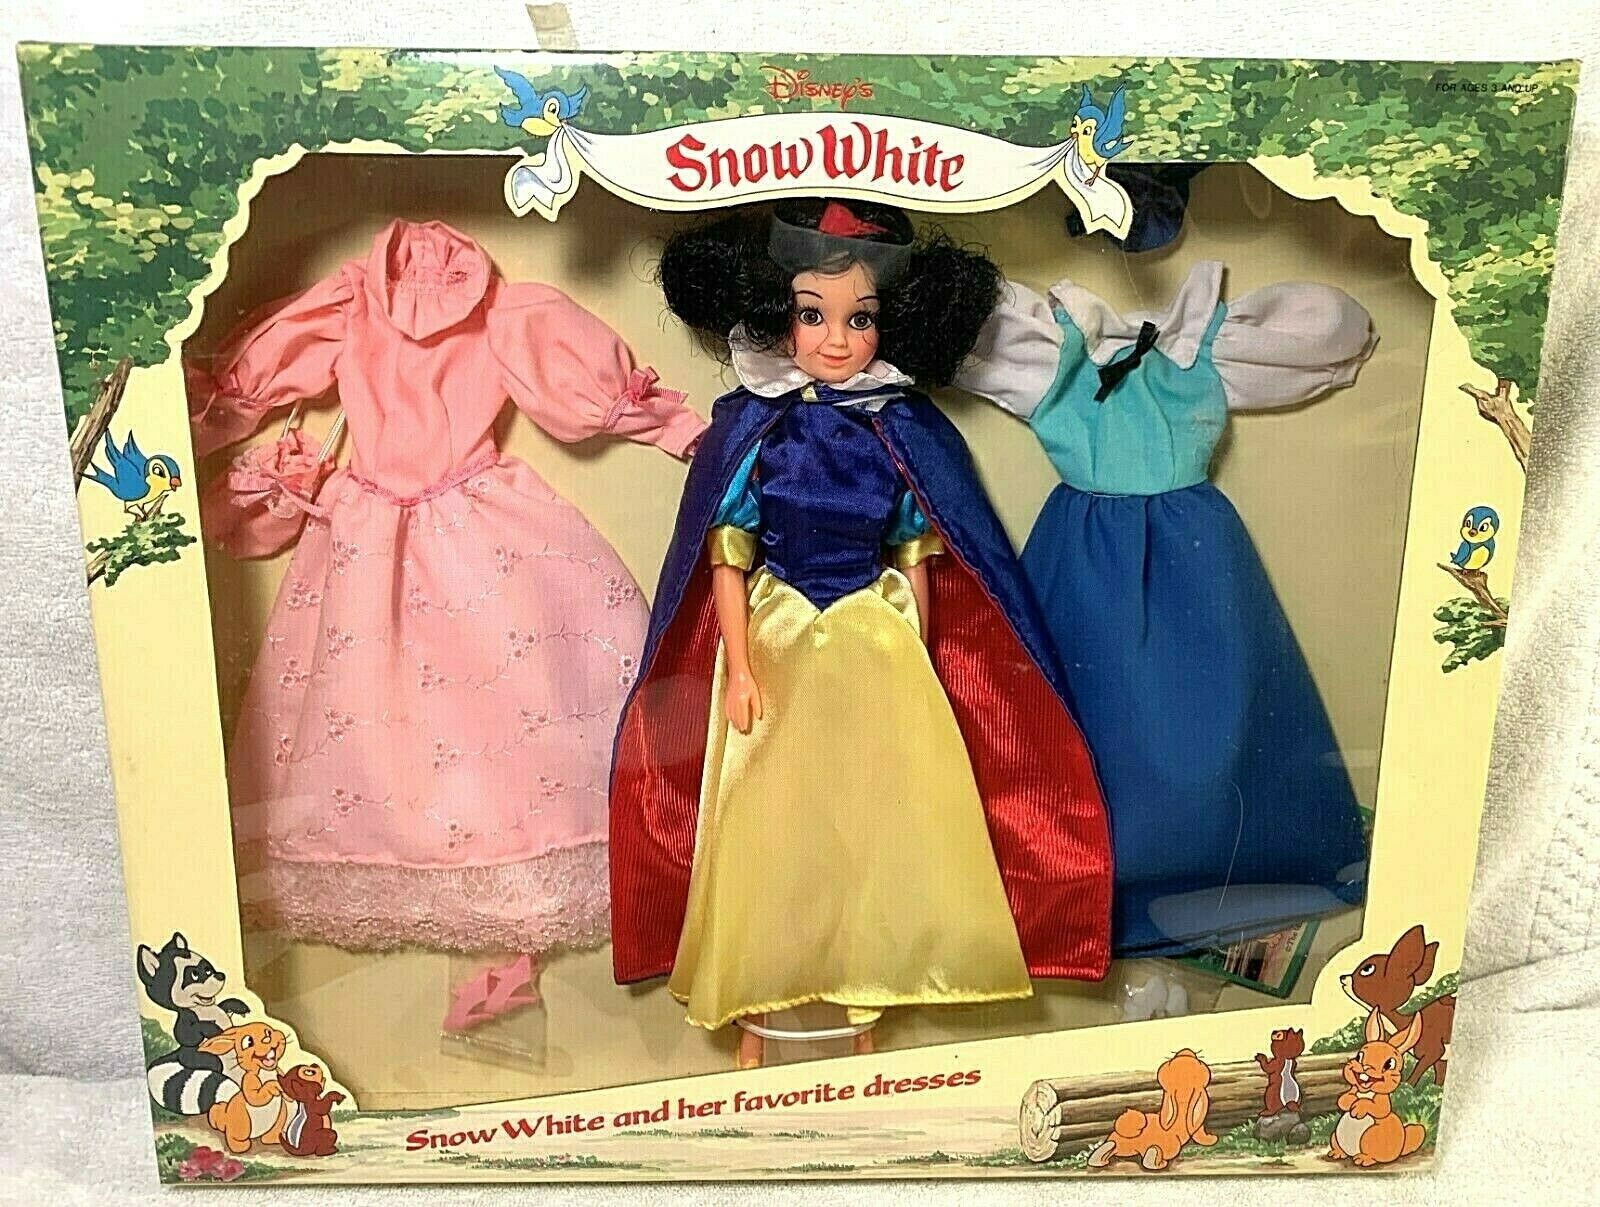 Disney's Snow White And Her Favorite Dresses Doll Read